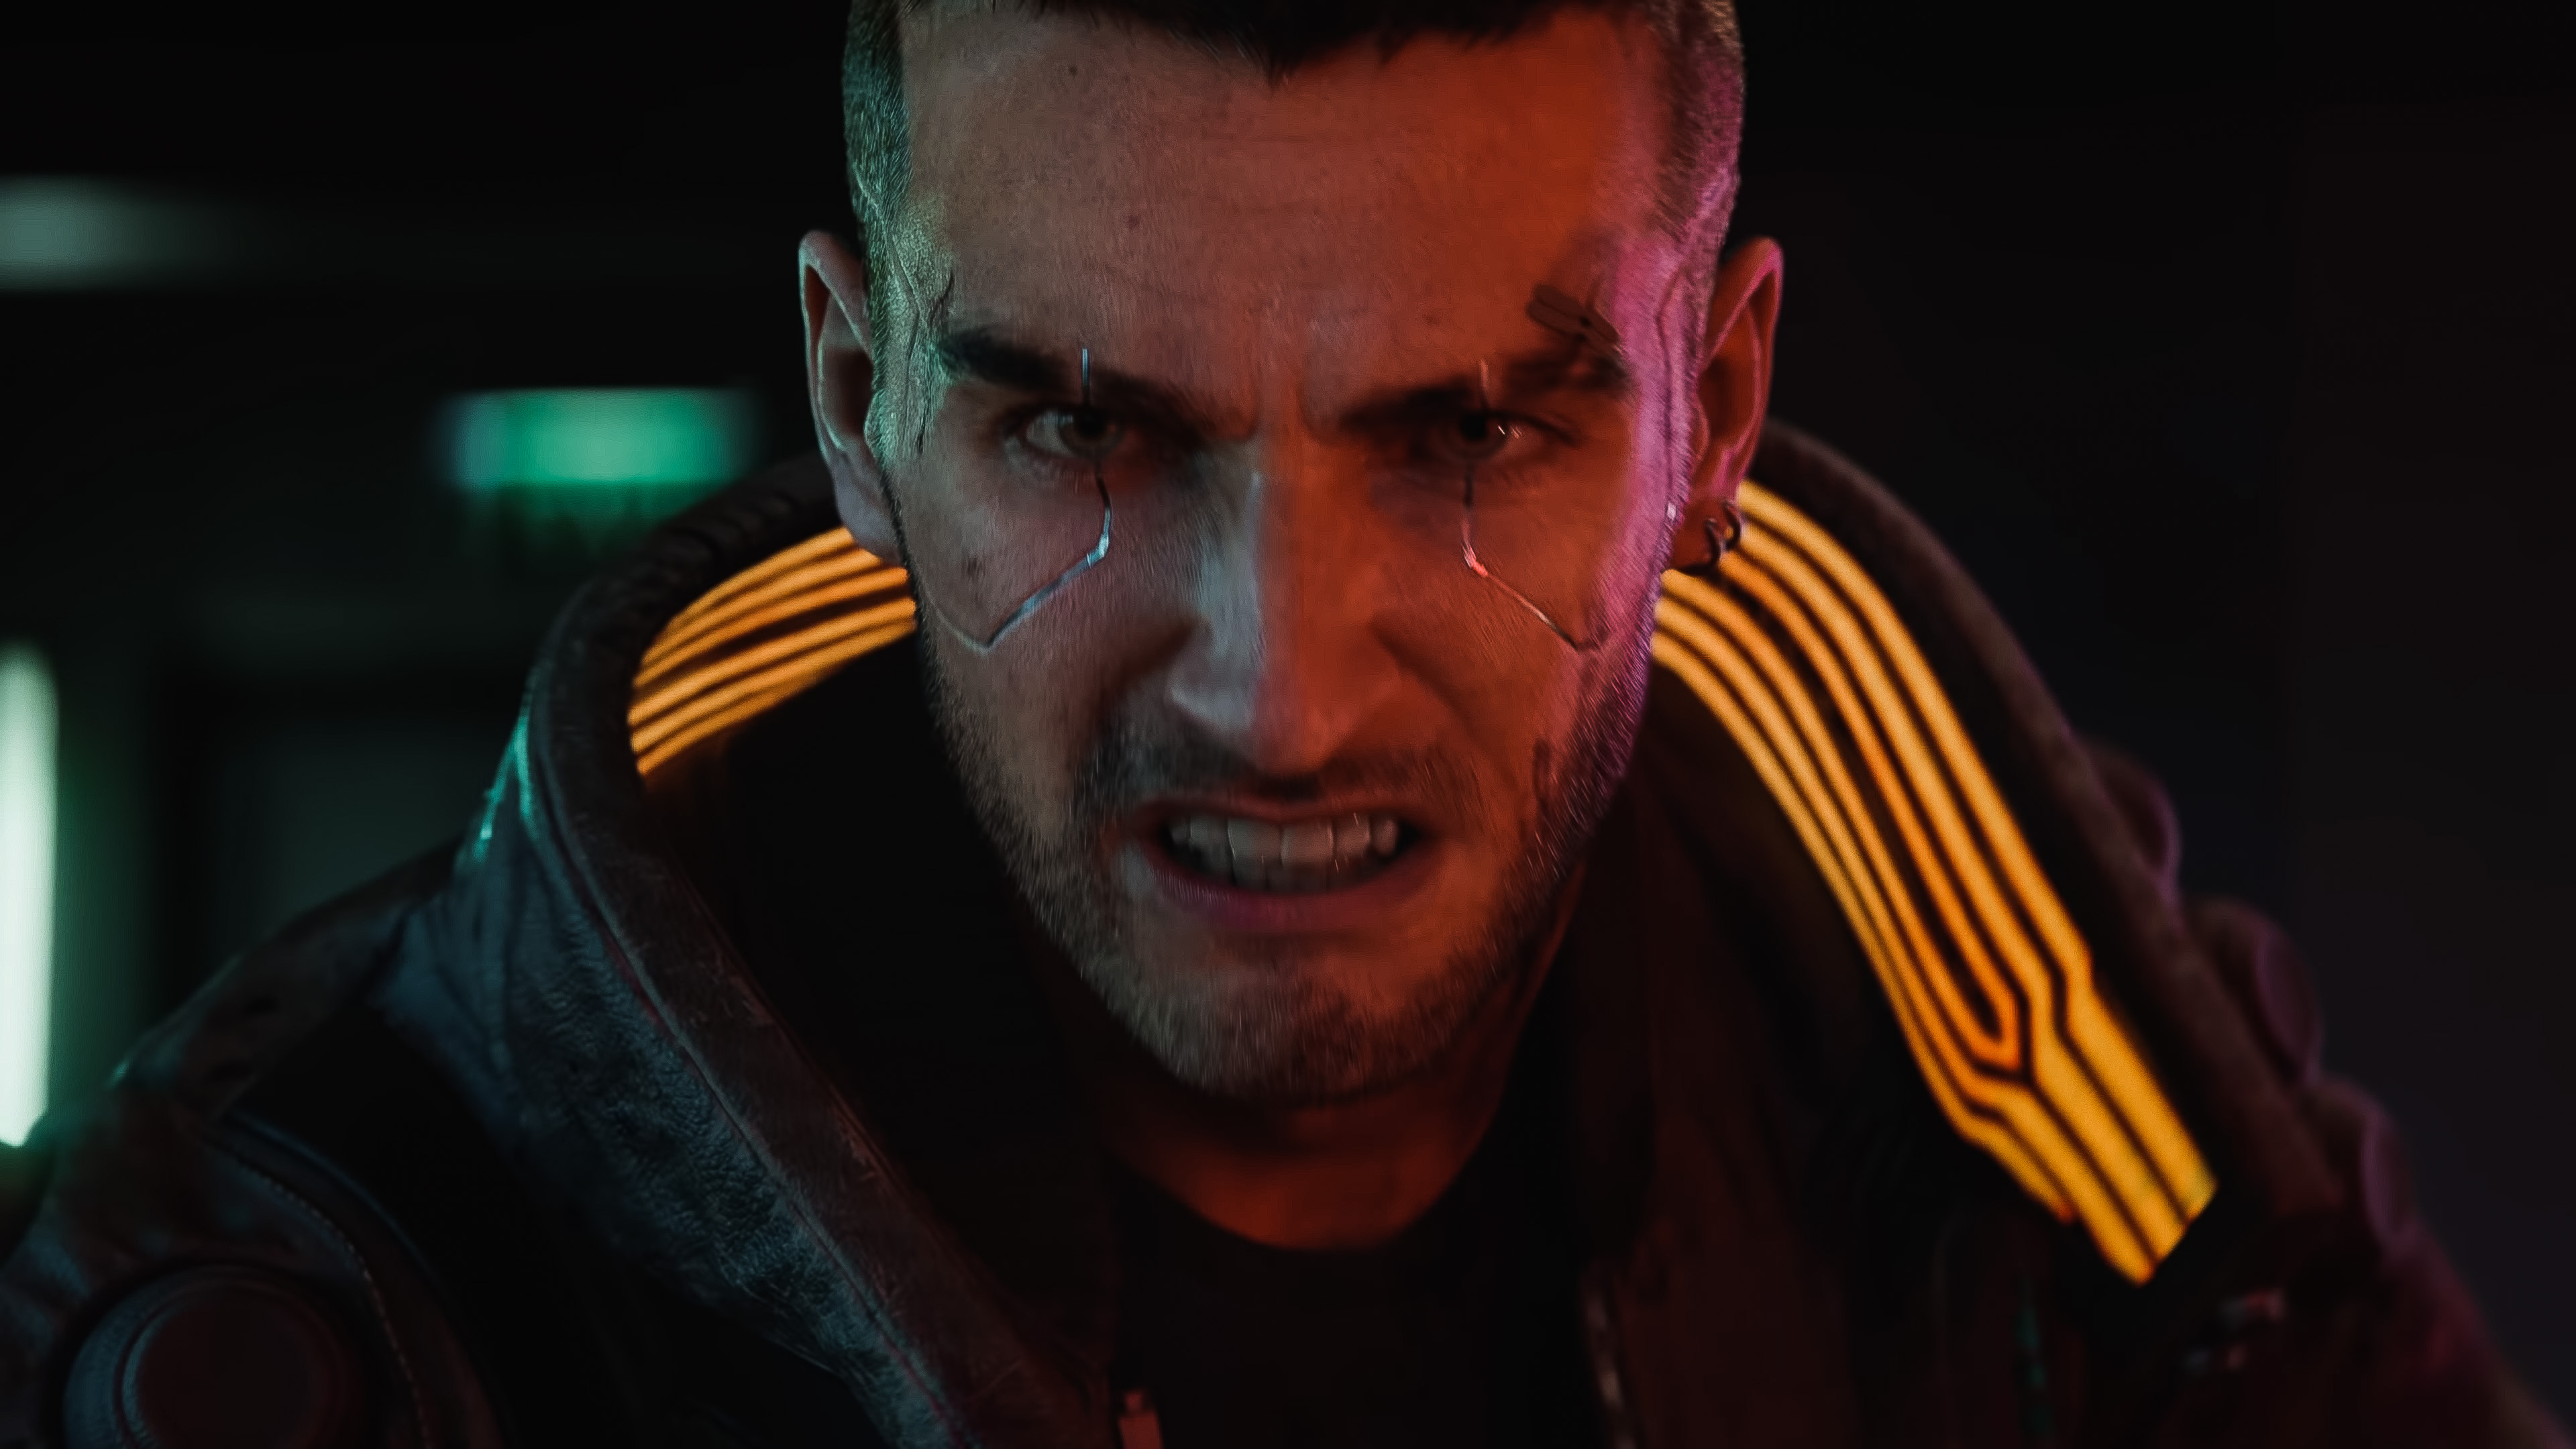 V In Cyberpunk 2077 New Wallpapers